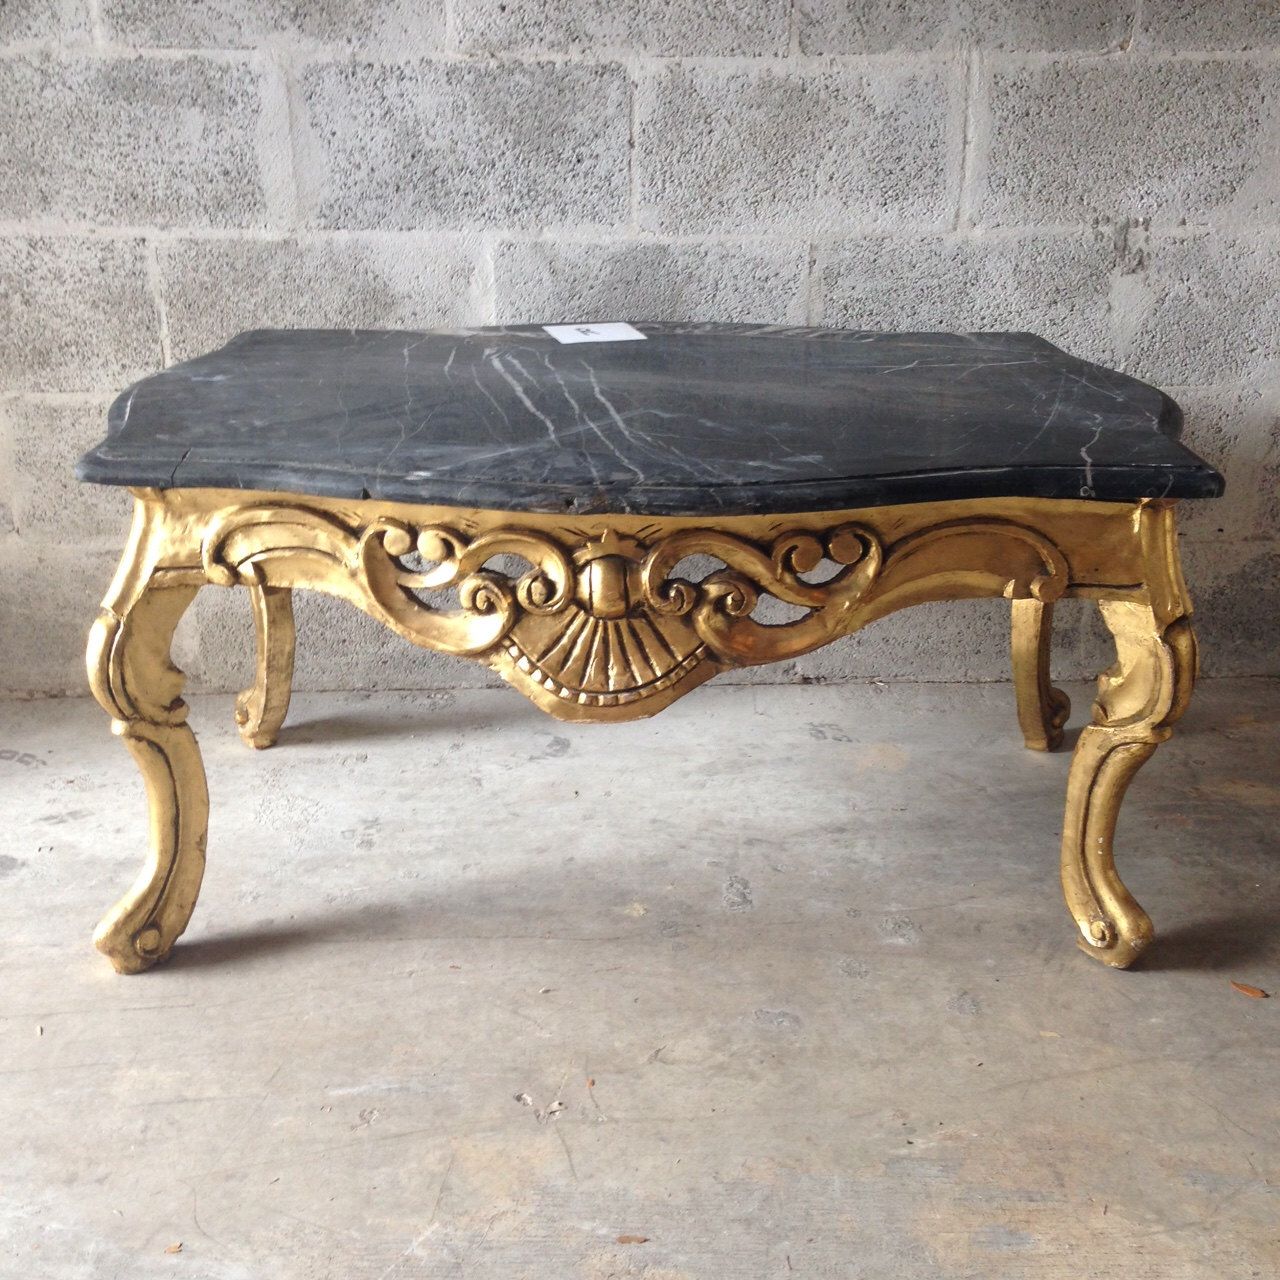 modern table legs probably perfect nice black marble top end gold coffee antique italian baroque leaf tables gild refinished heavy carvings rococo louis xvi sittinprettybymyleen